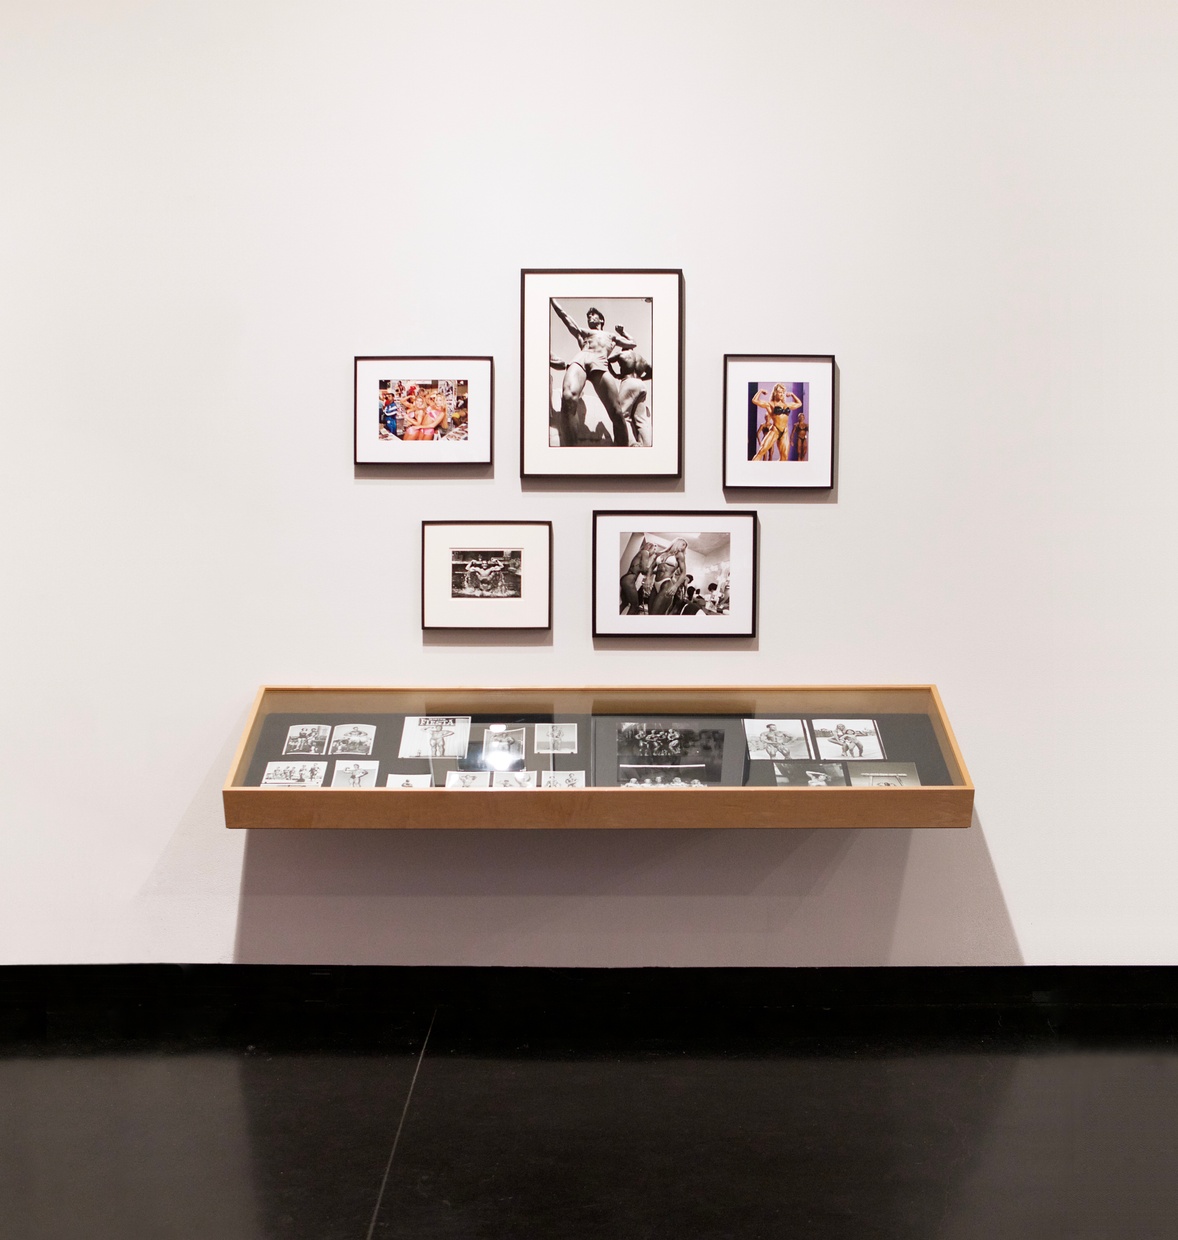 Five framed photographs featuring muscular bodies hung on a white wall above a glass case with black and white photographs.